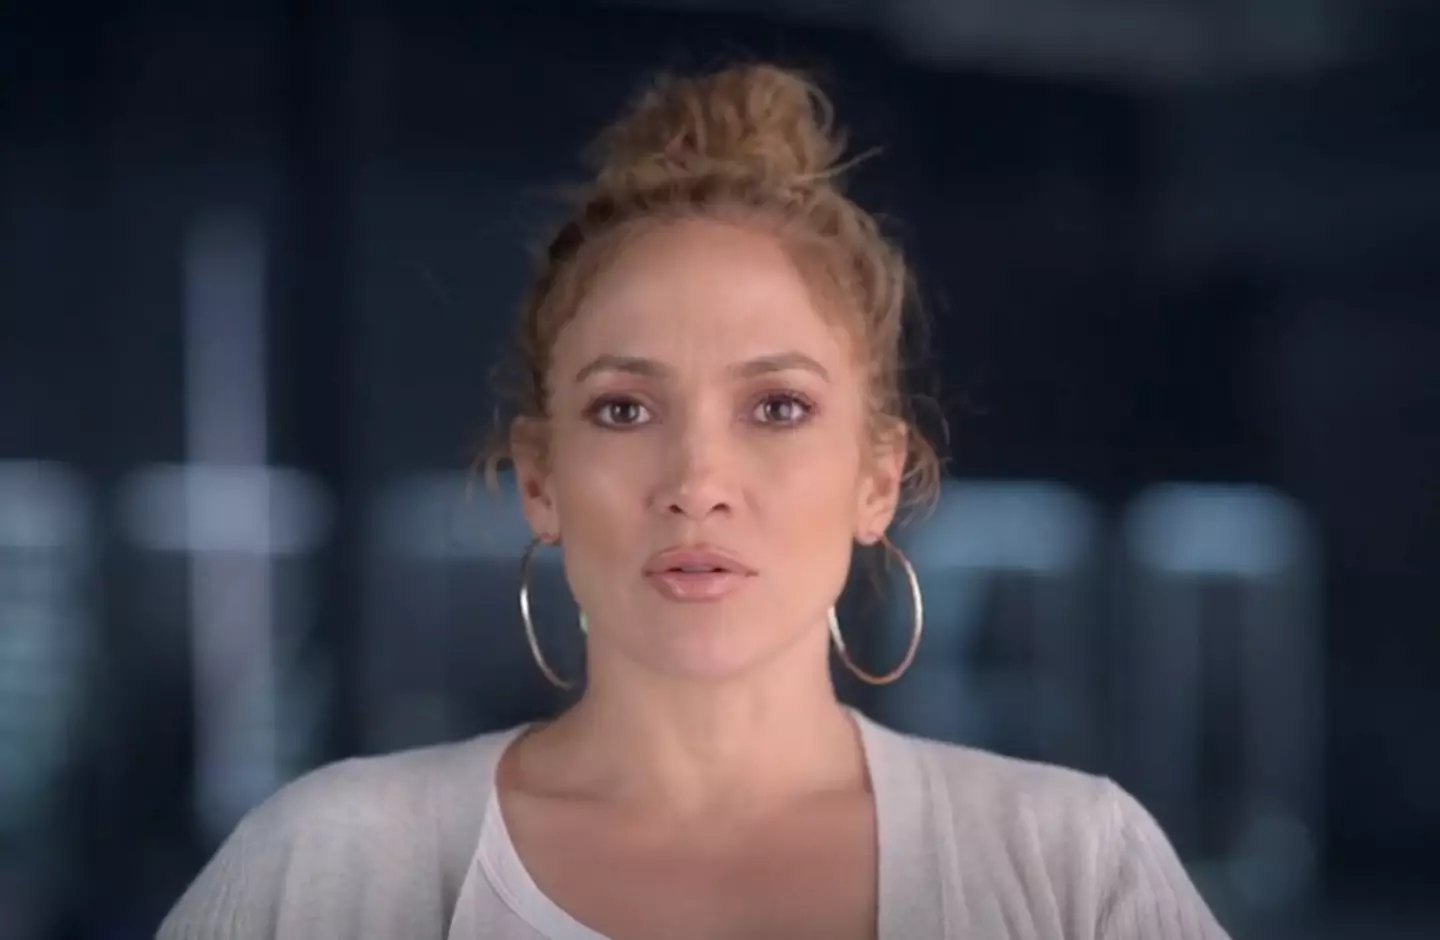 Halftime gives a behind-the-scenes look at Jennifer Lopez's life.